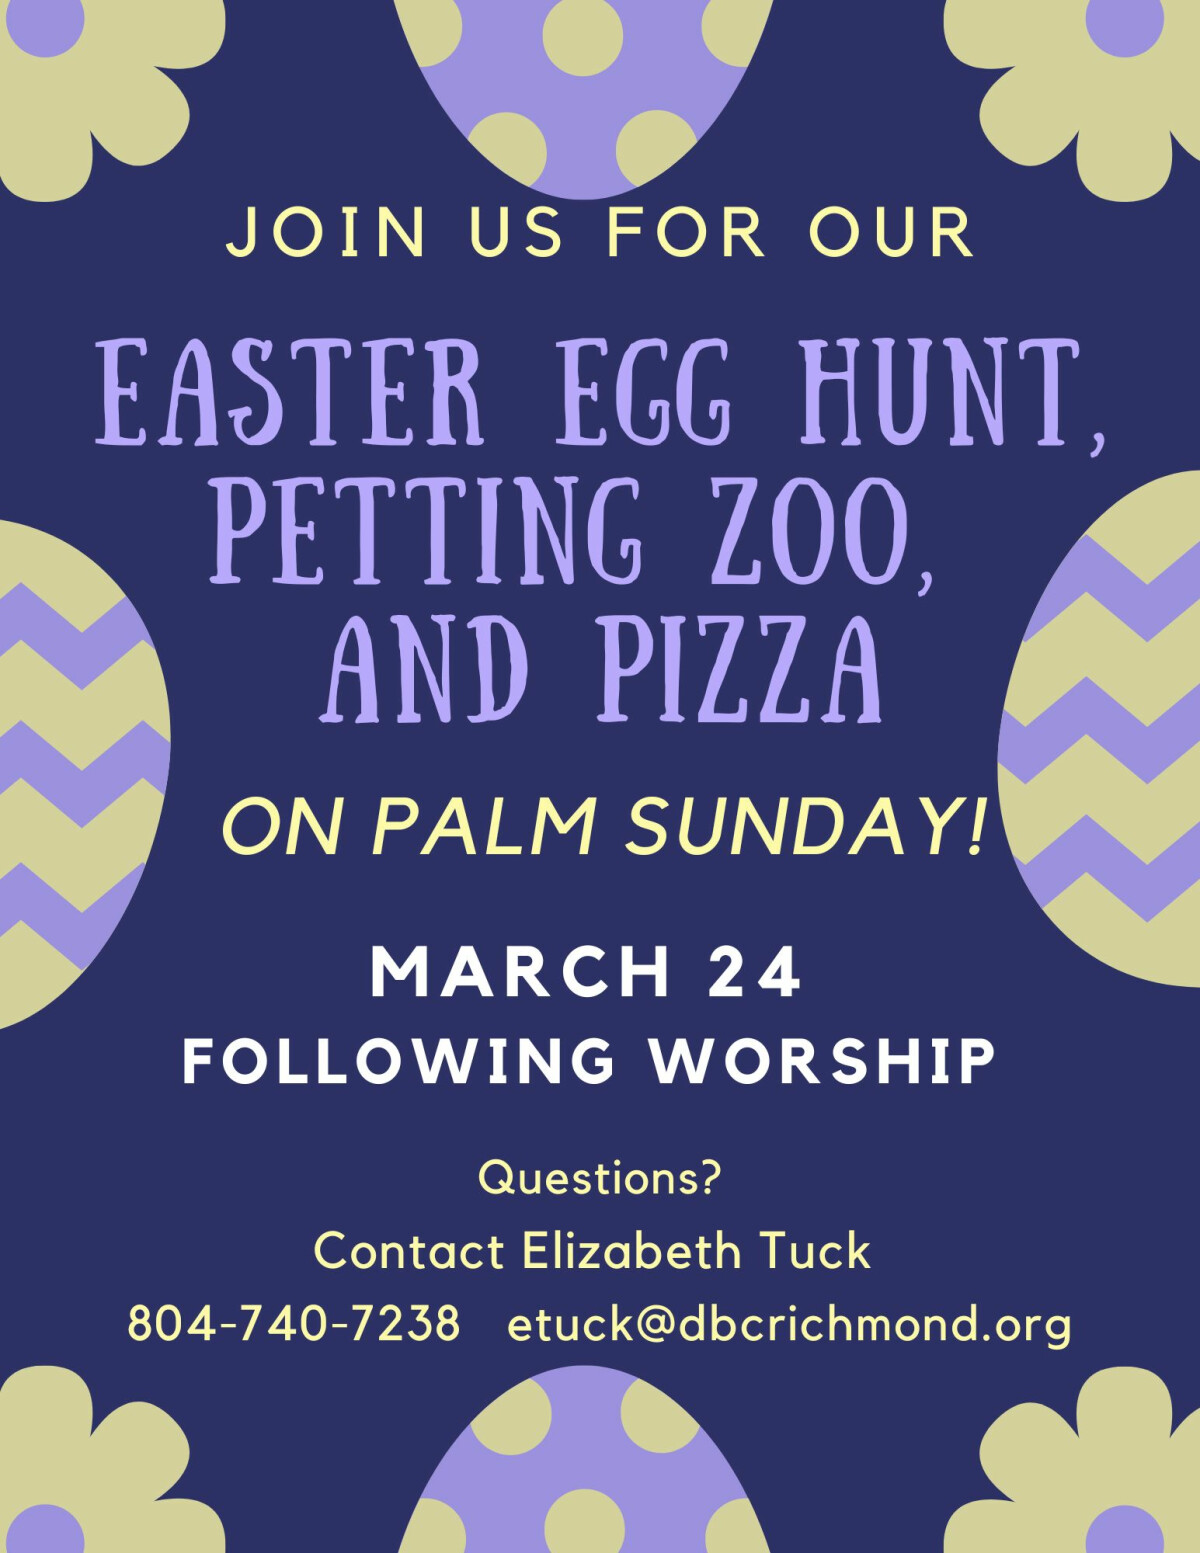 Easter Egg Hunt, Petting Zoo, and Pizza!